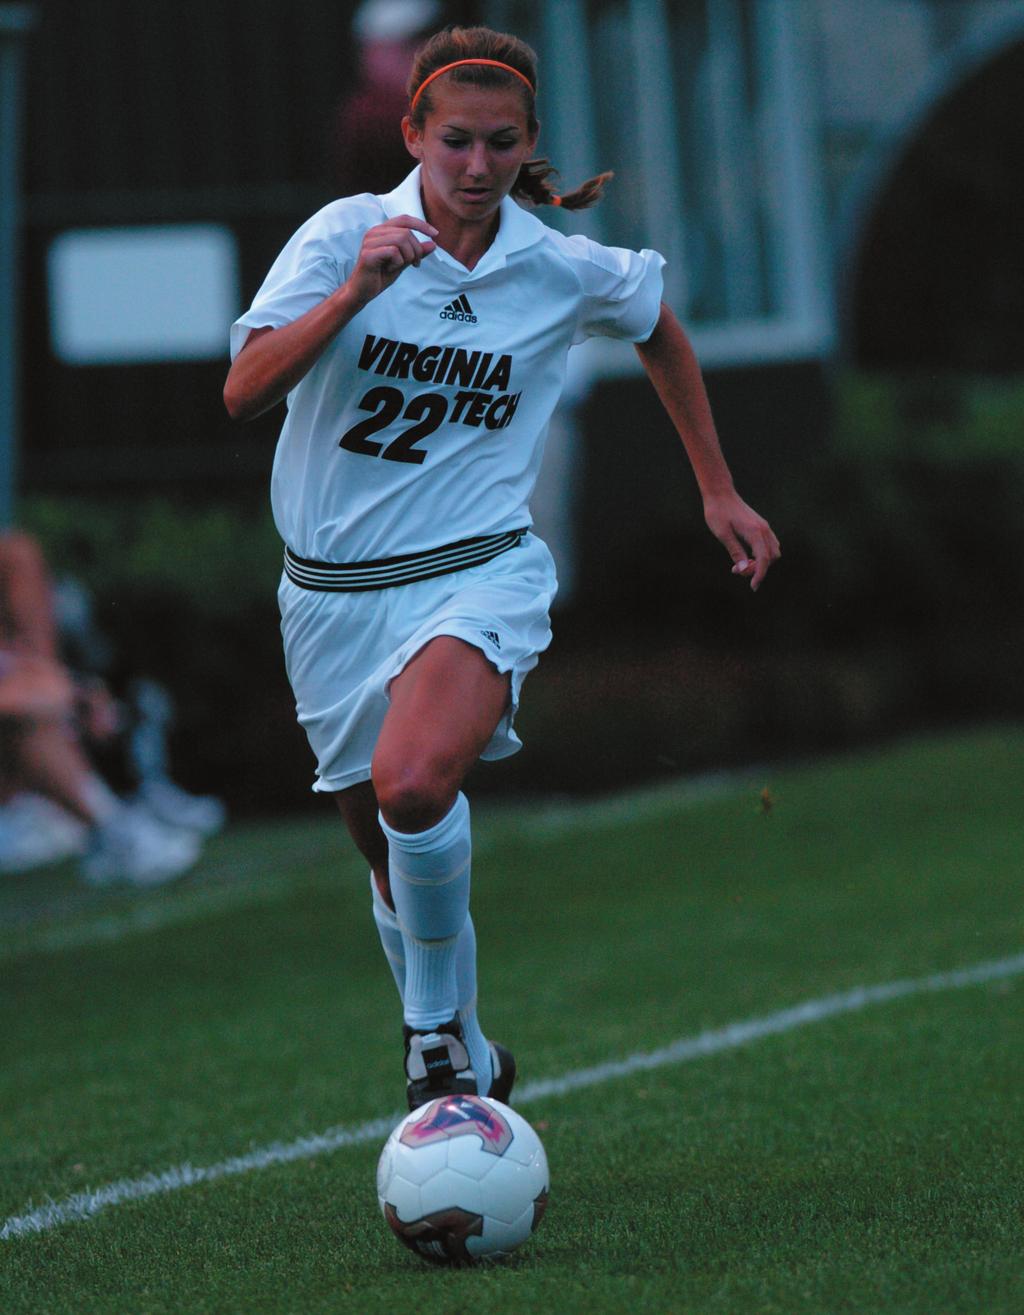 The national tournament invite was the ﬁrst in team history. -VT- Soccer Buzz Mid-Atlantic Poll (Sept. 12, 2005) 1. Penn State (6-0), 2. Virginia (3-2-1), 3. West Virginia (3-3), 4.